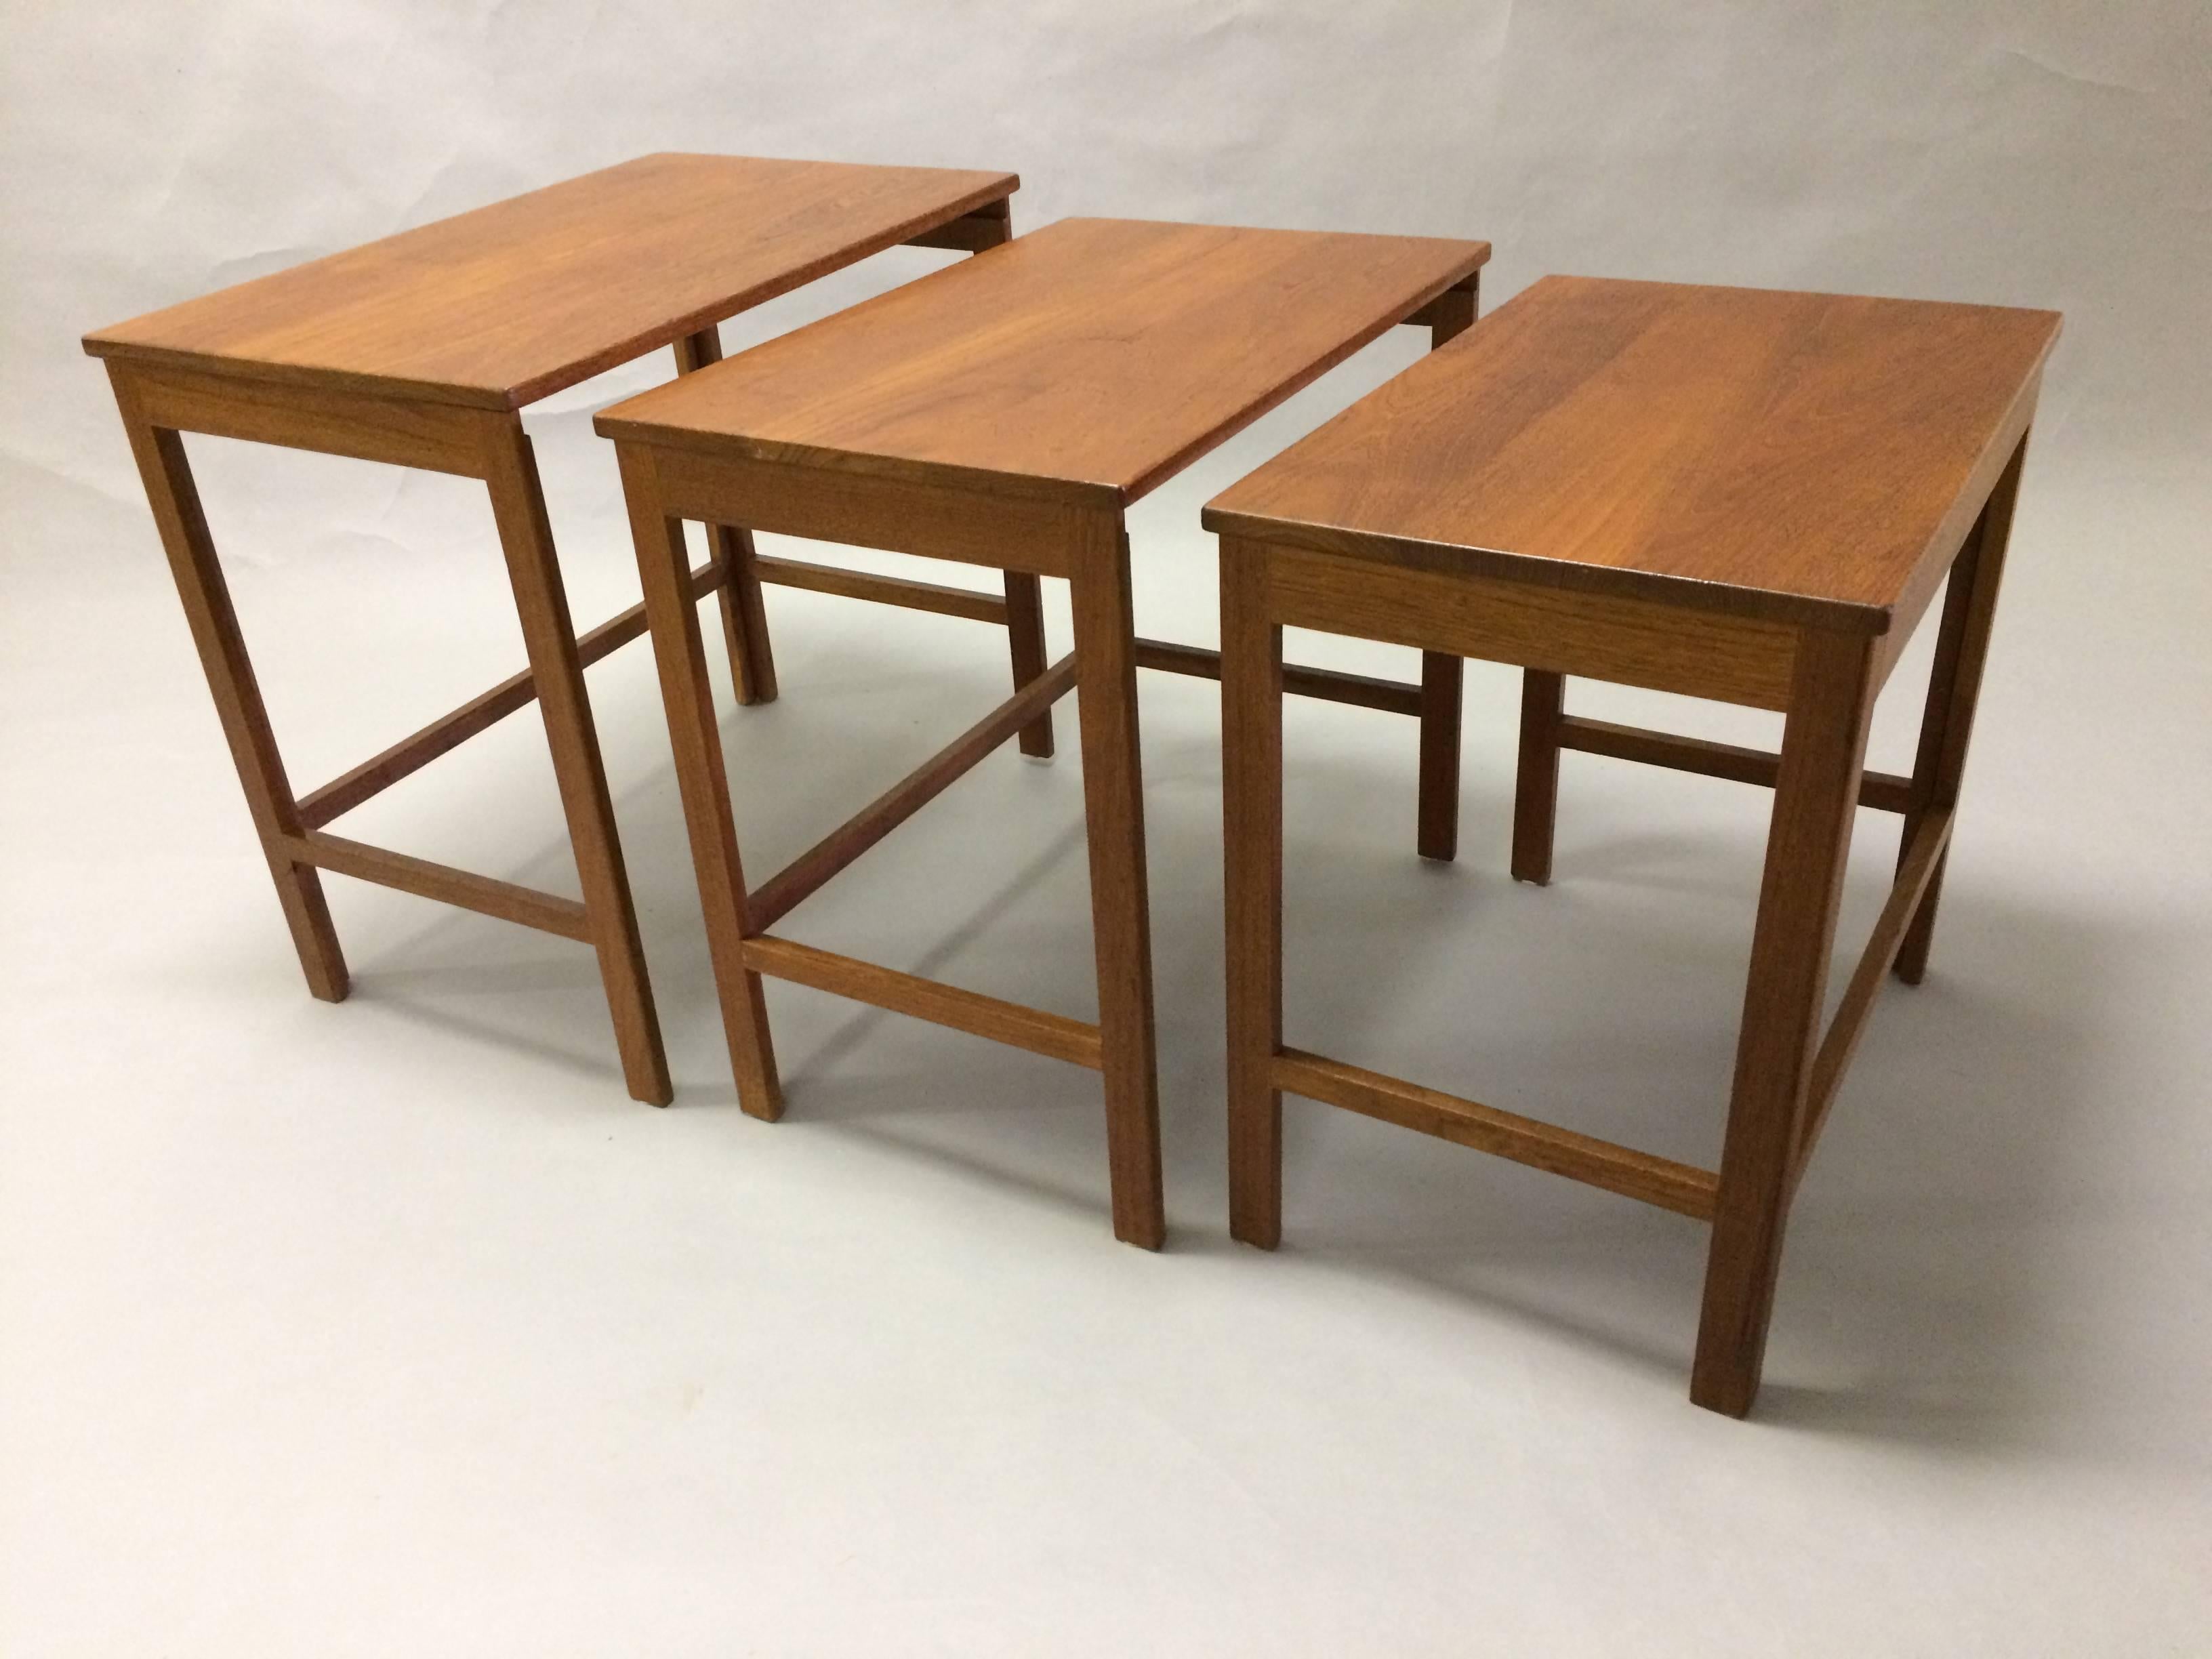 Classic set of nesting tables designed by Peter Hvidt & Orla Mølgaard Nielsen for France & Son, made of solid teak.

Seizes in cm/inch:
Large table - D: 37.5/14.8 W: 60/23.6 H: 54/21.3
Medium table - D: 36/14.2 W: 57/22.4 H: 52/20.5
Small table - D: